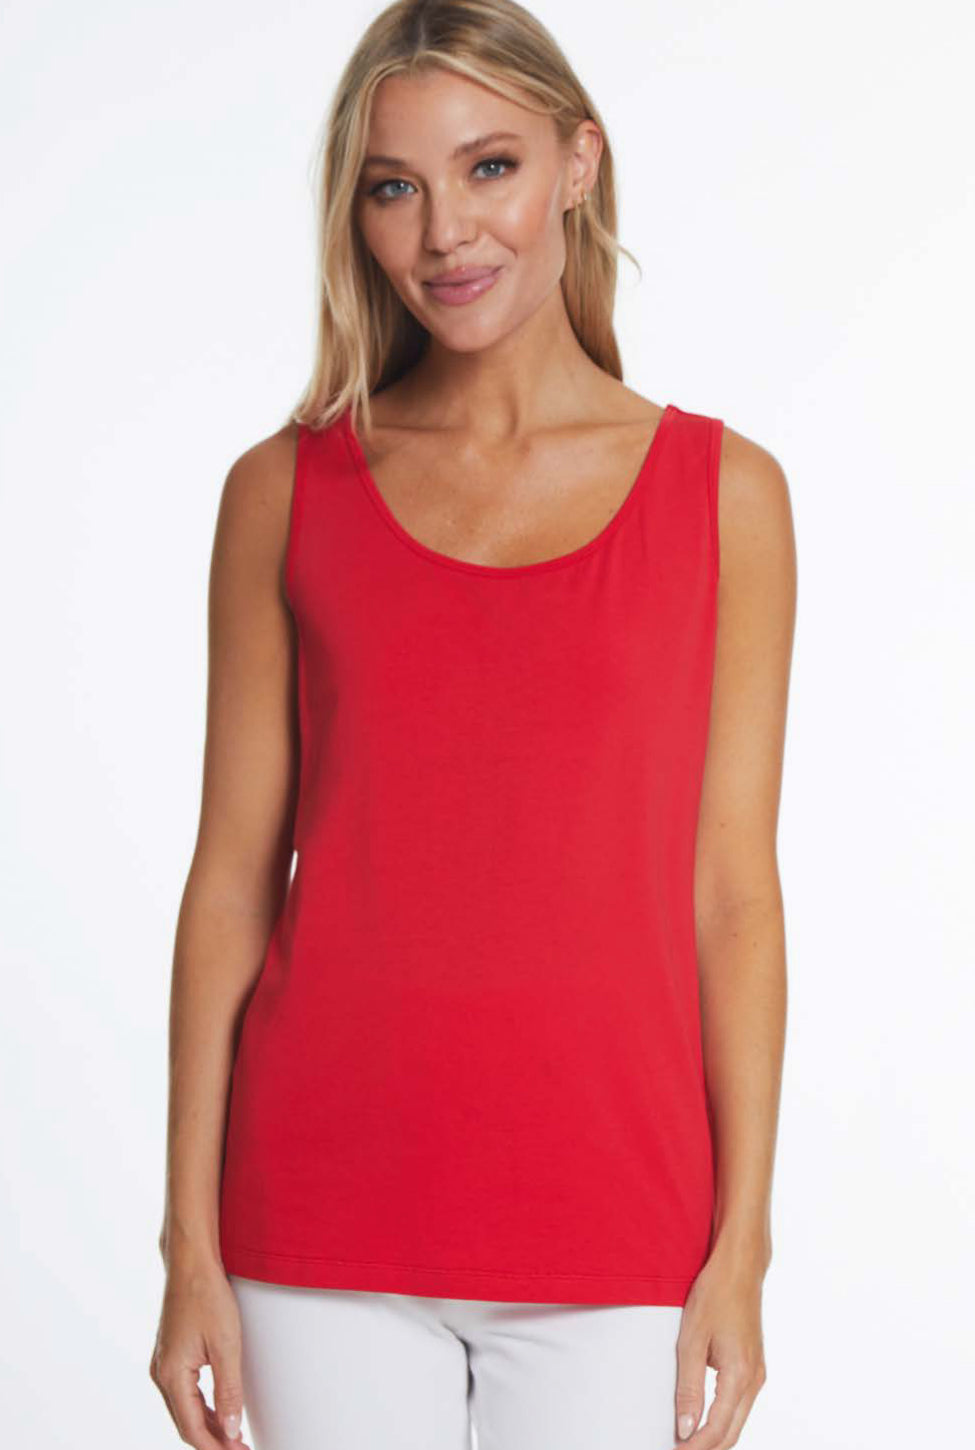 Multiples: Double Scoop Neck Solid Knit Tank Top in Red M24110TM